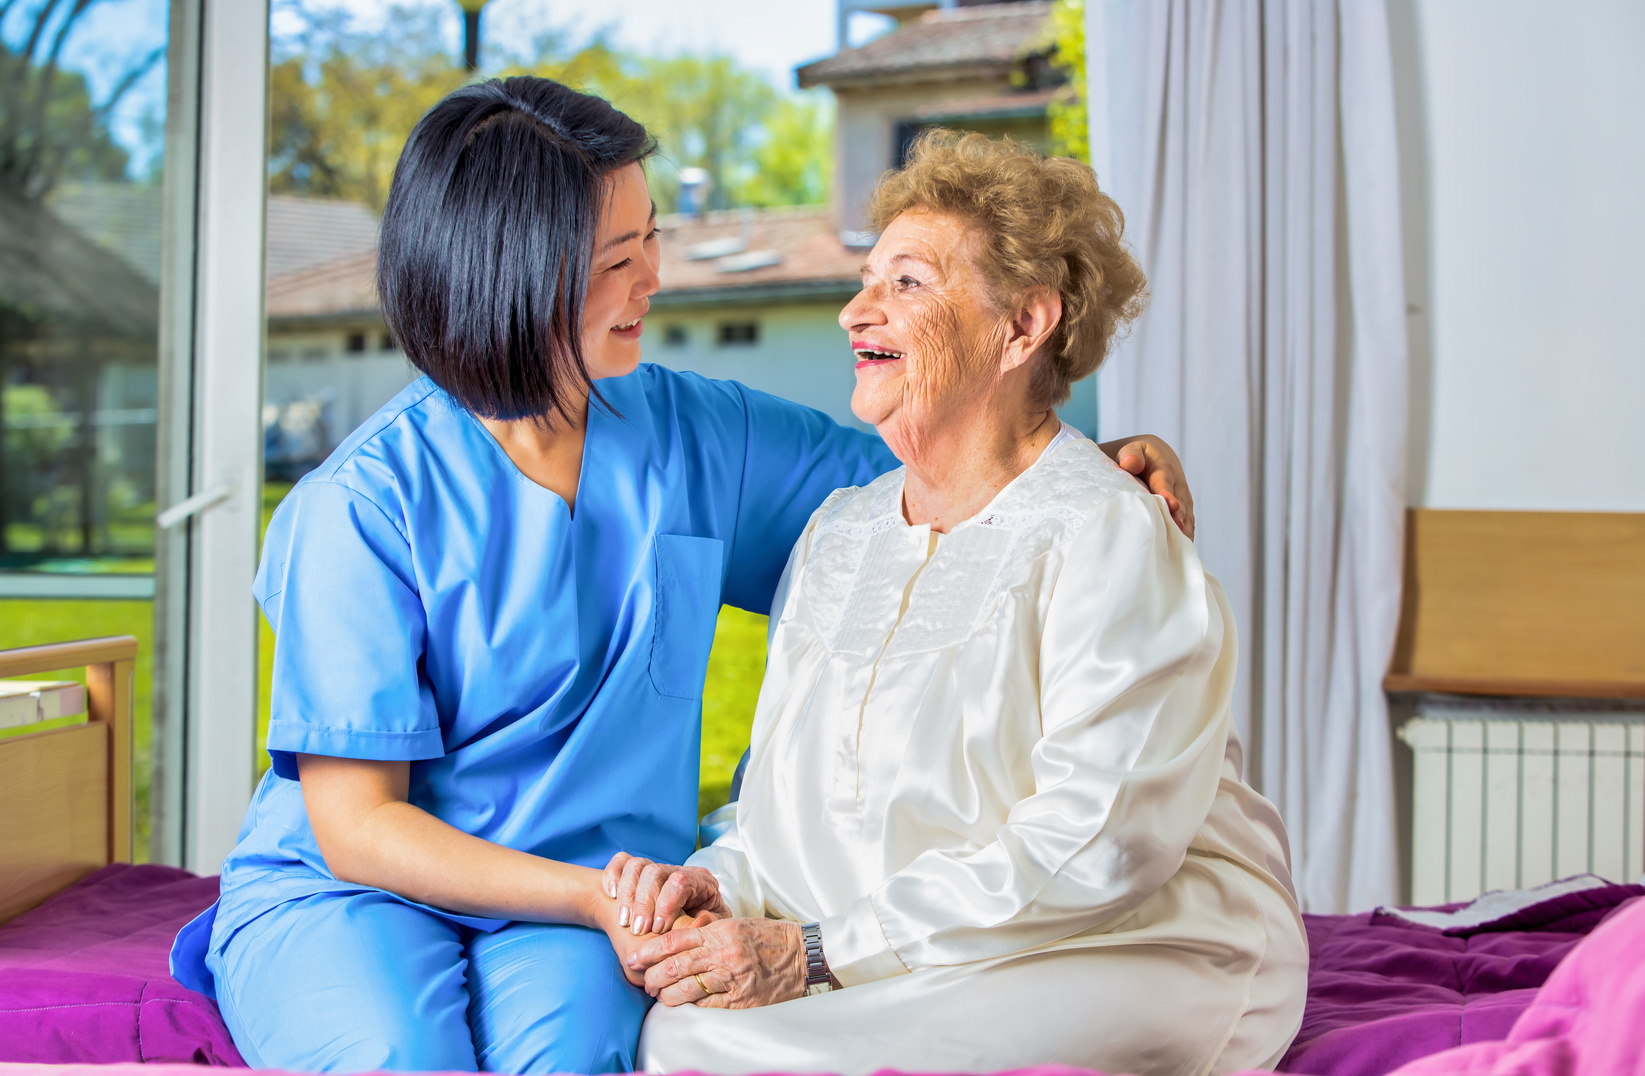 Home health care. Asian nurse consoling elderly lady just woken up